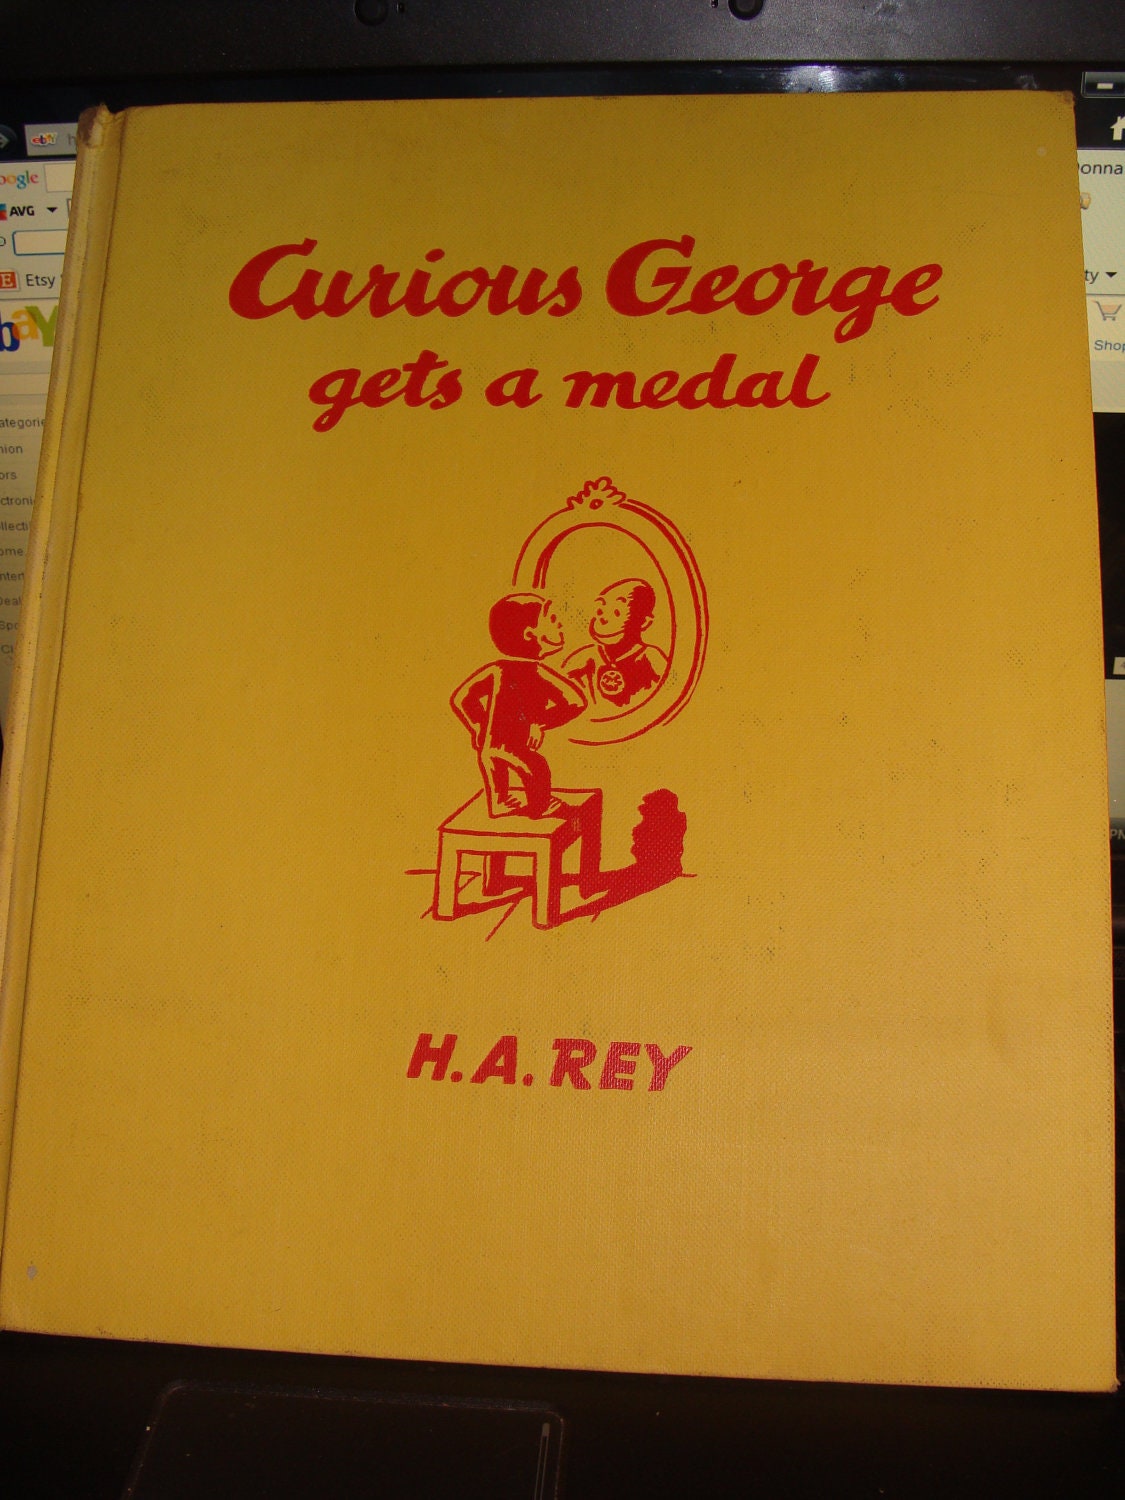 curious george gets a medal